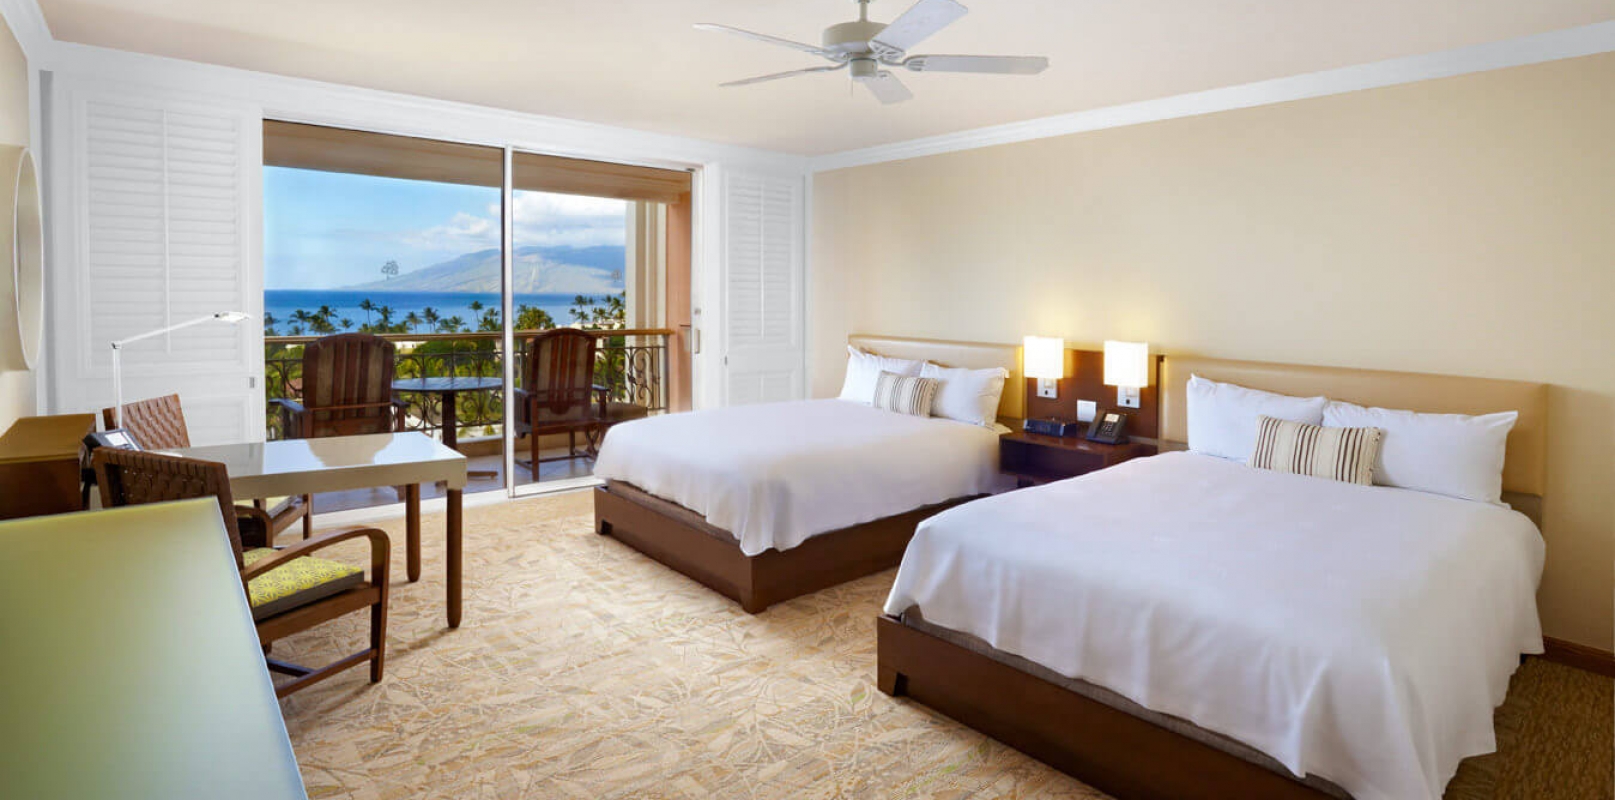 two Queen beds and seating area in Queen Oceanview room with patio doors give view of outside